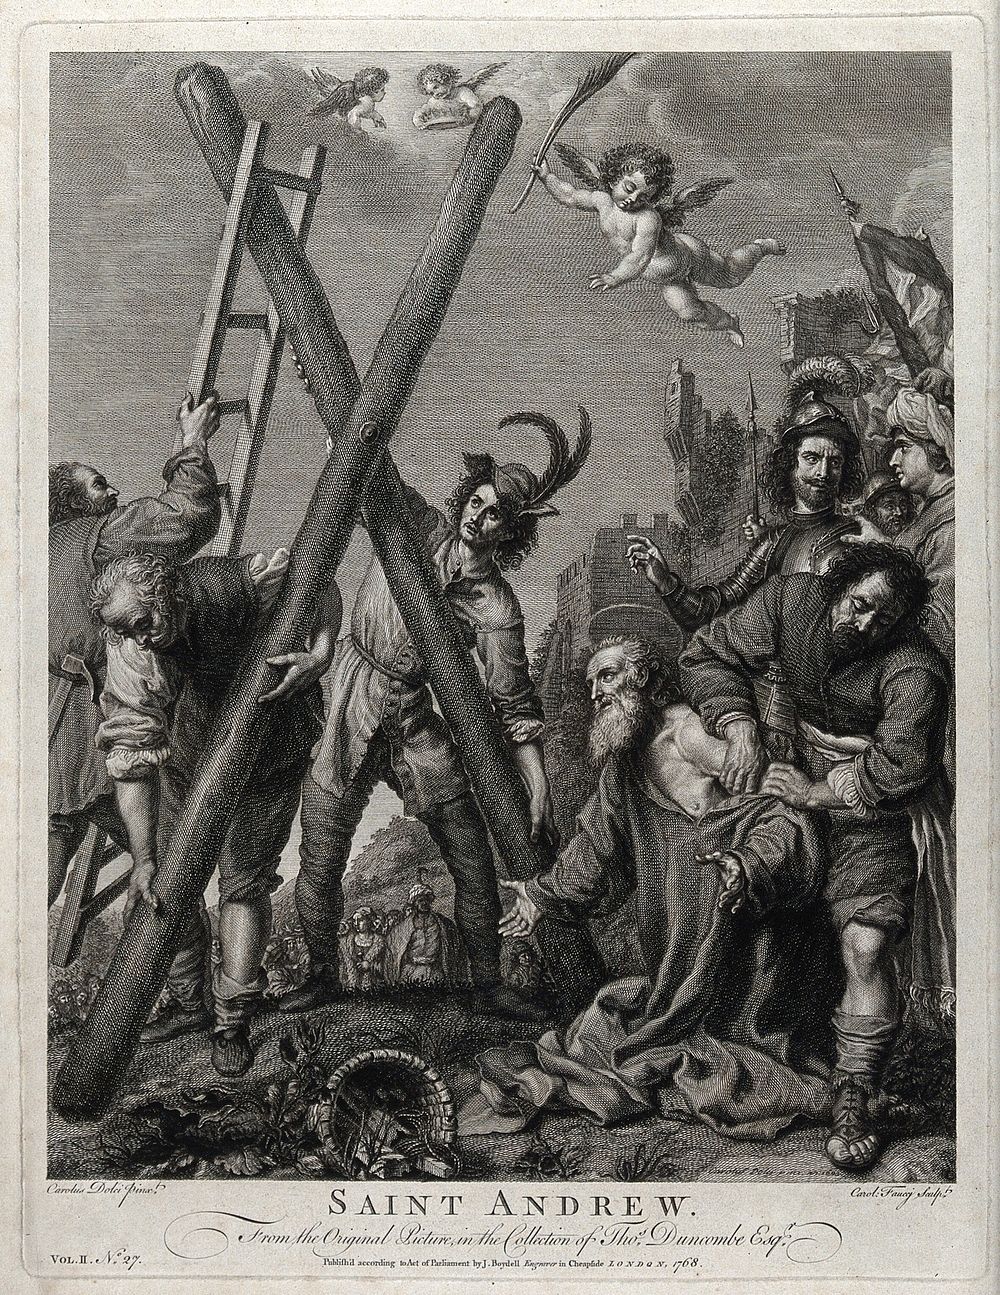 The martyrdom of Saint Andrew. Line engraving by C. Faucci, 1768 after C. Dolci, 1643.